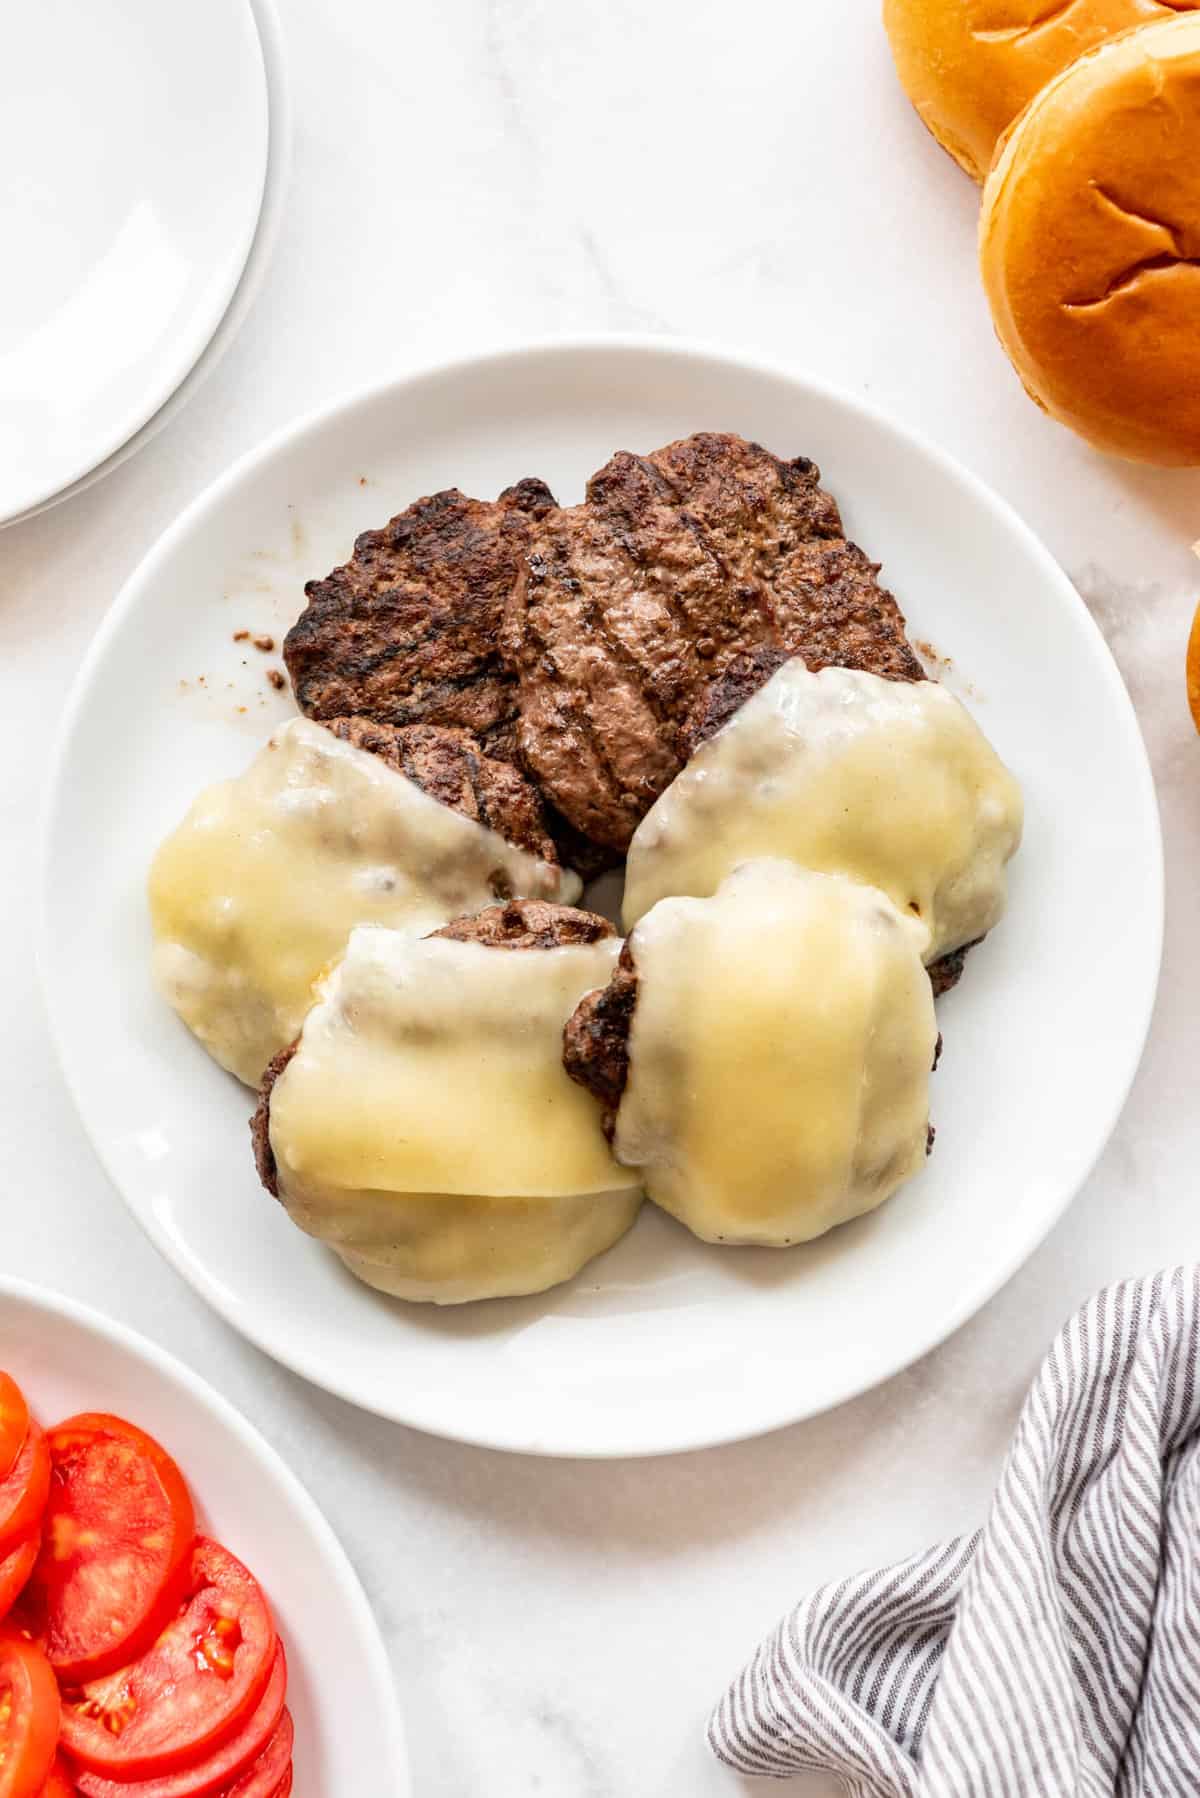 Bison burgers and bison cheeseburgers on a white plate.